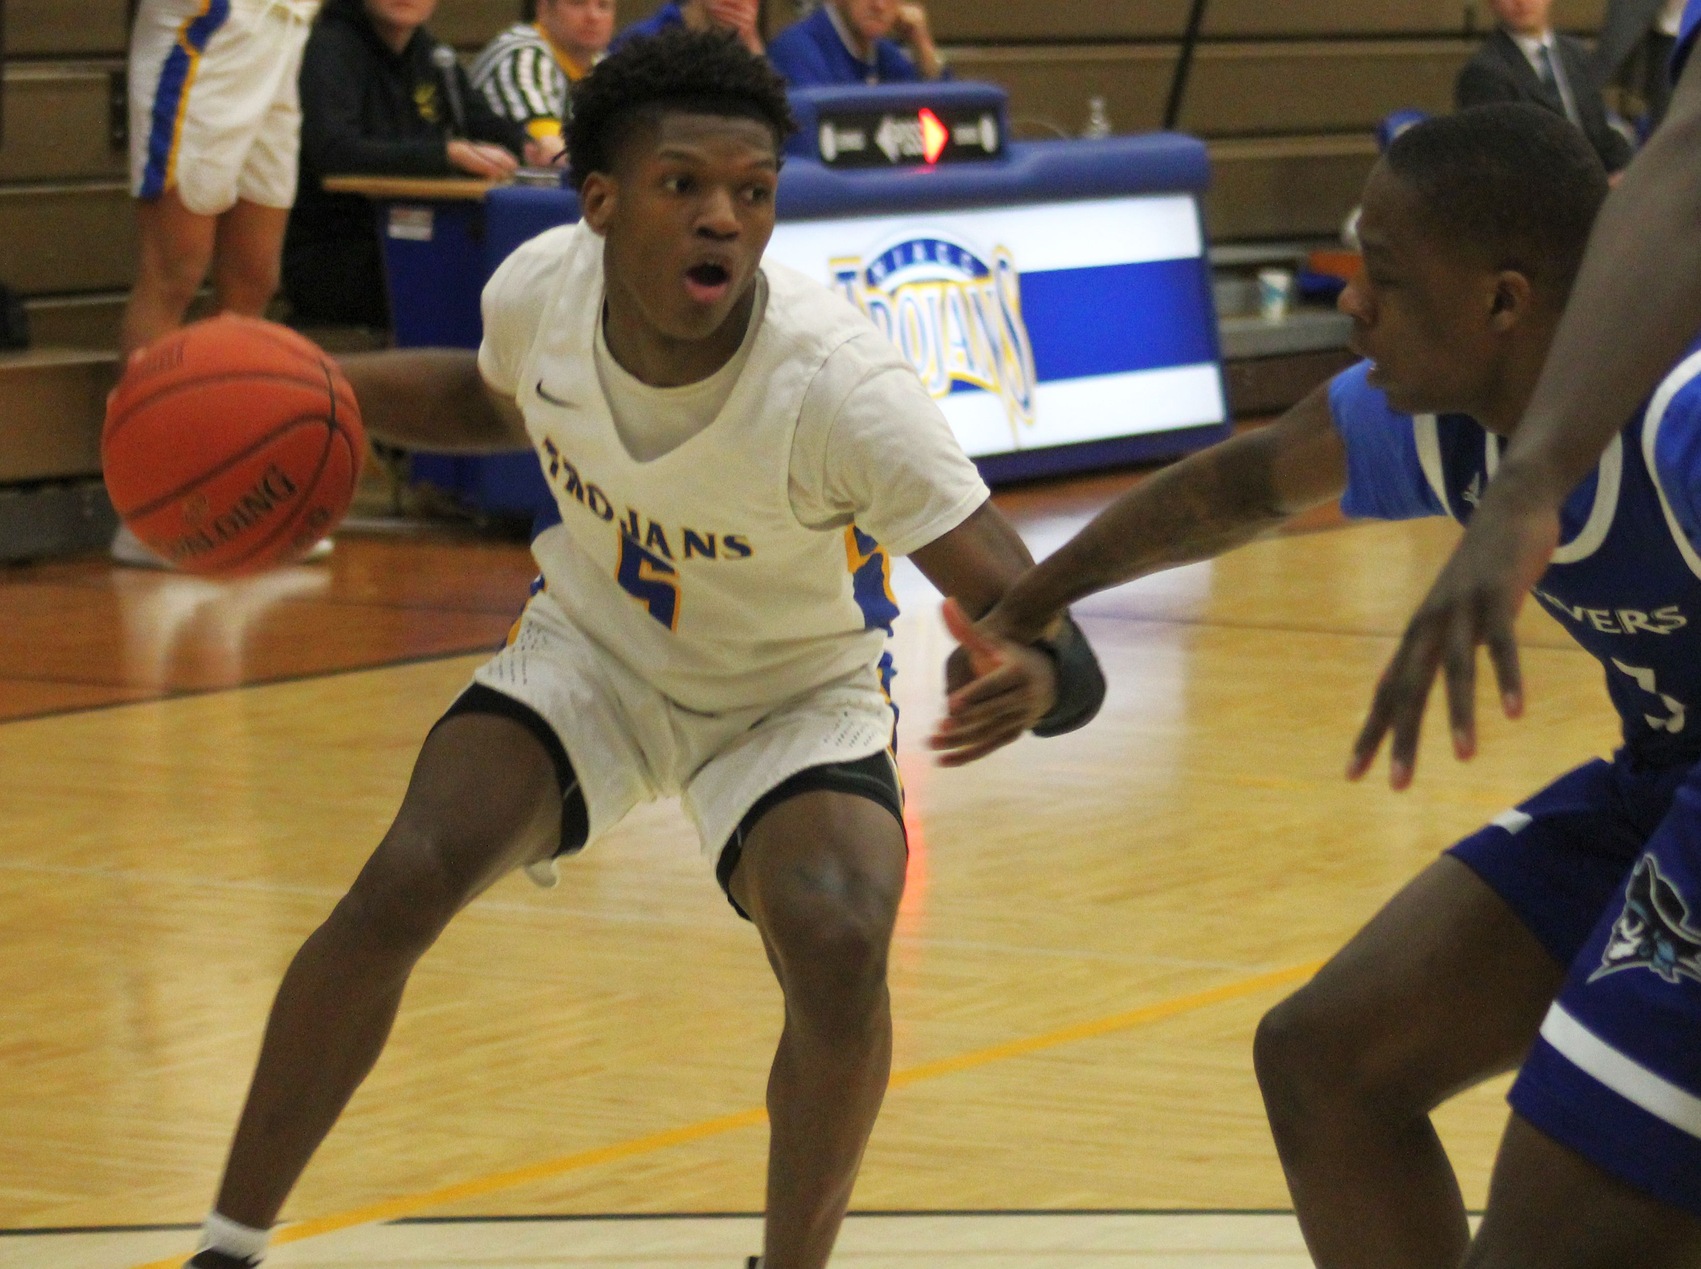 NIACC's Quentin Hardrict looks to drive in Saturday's game against Iowa Western.